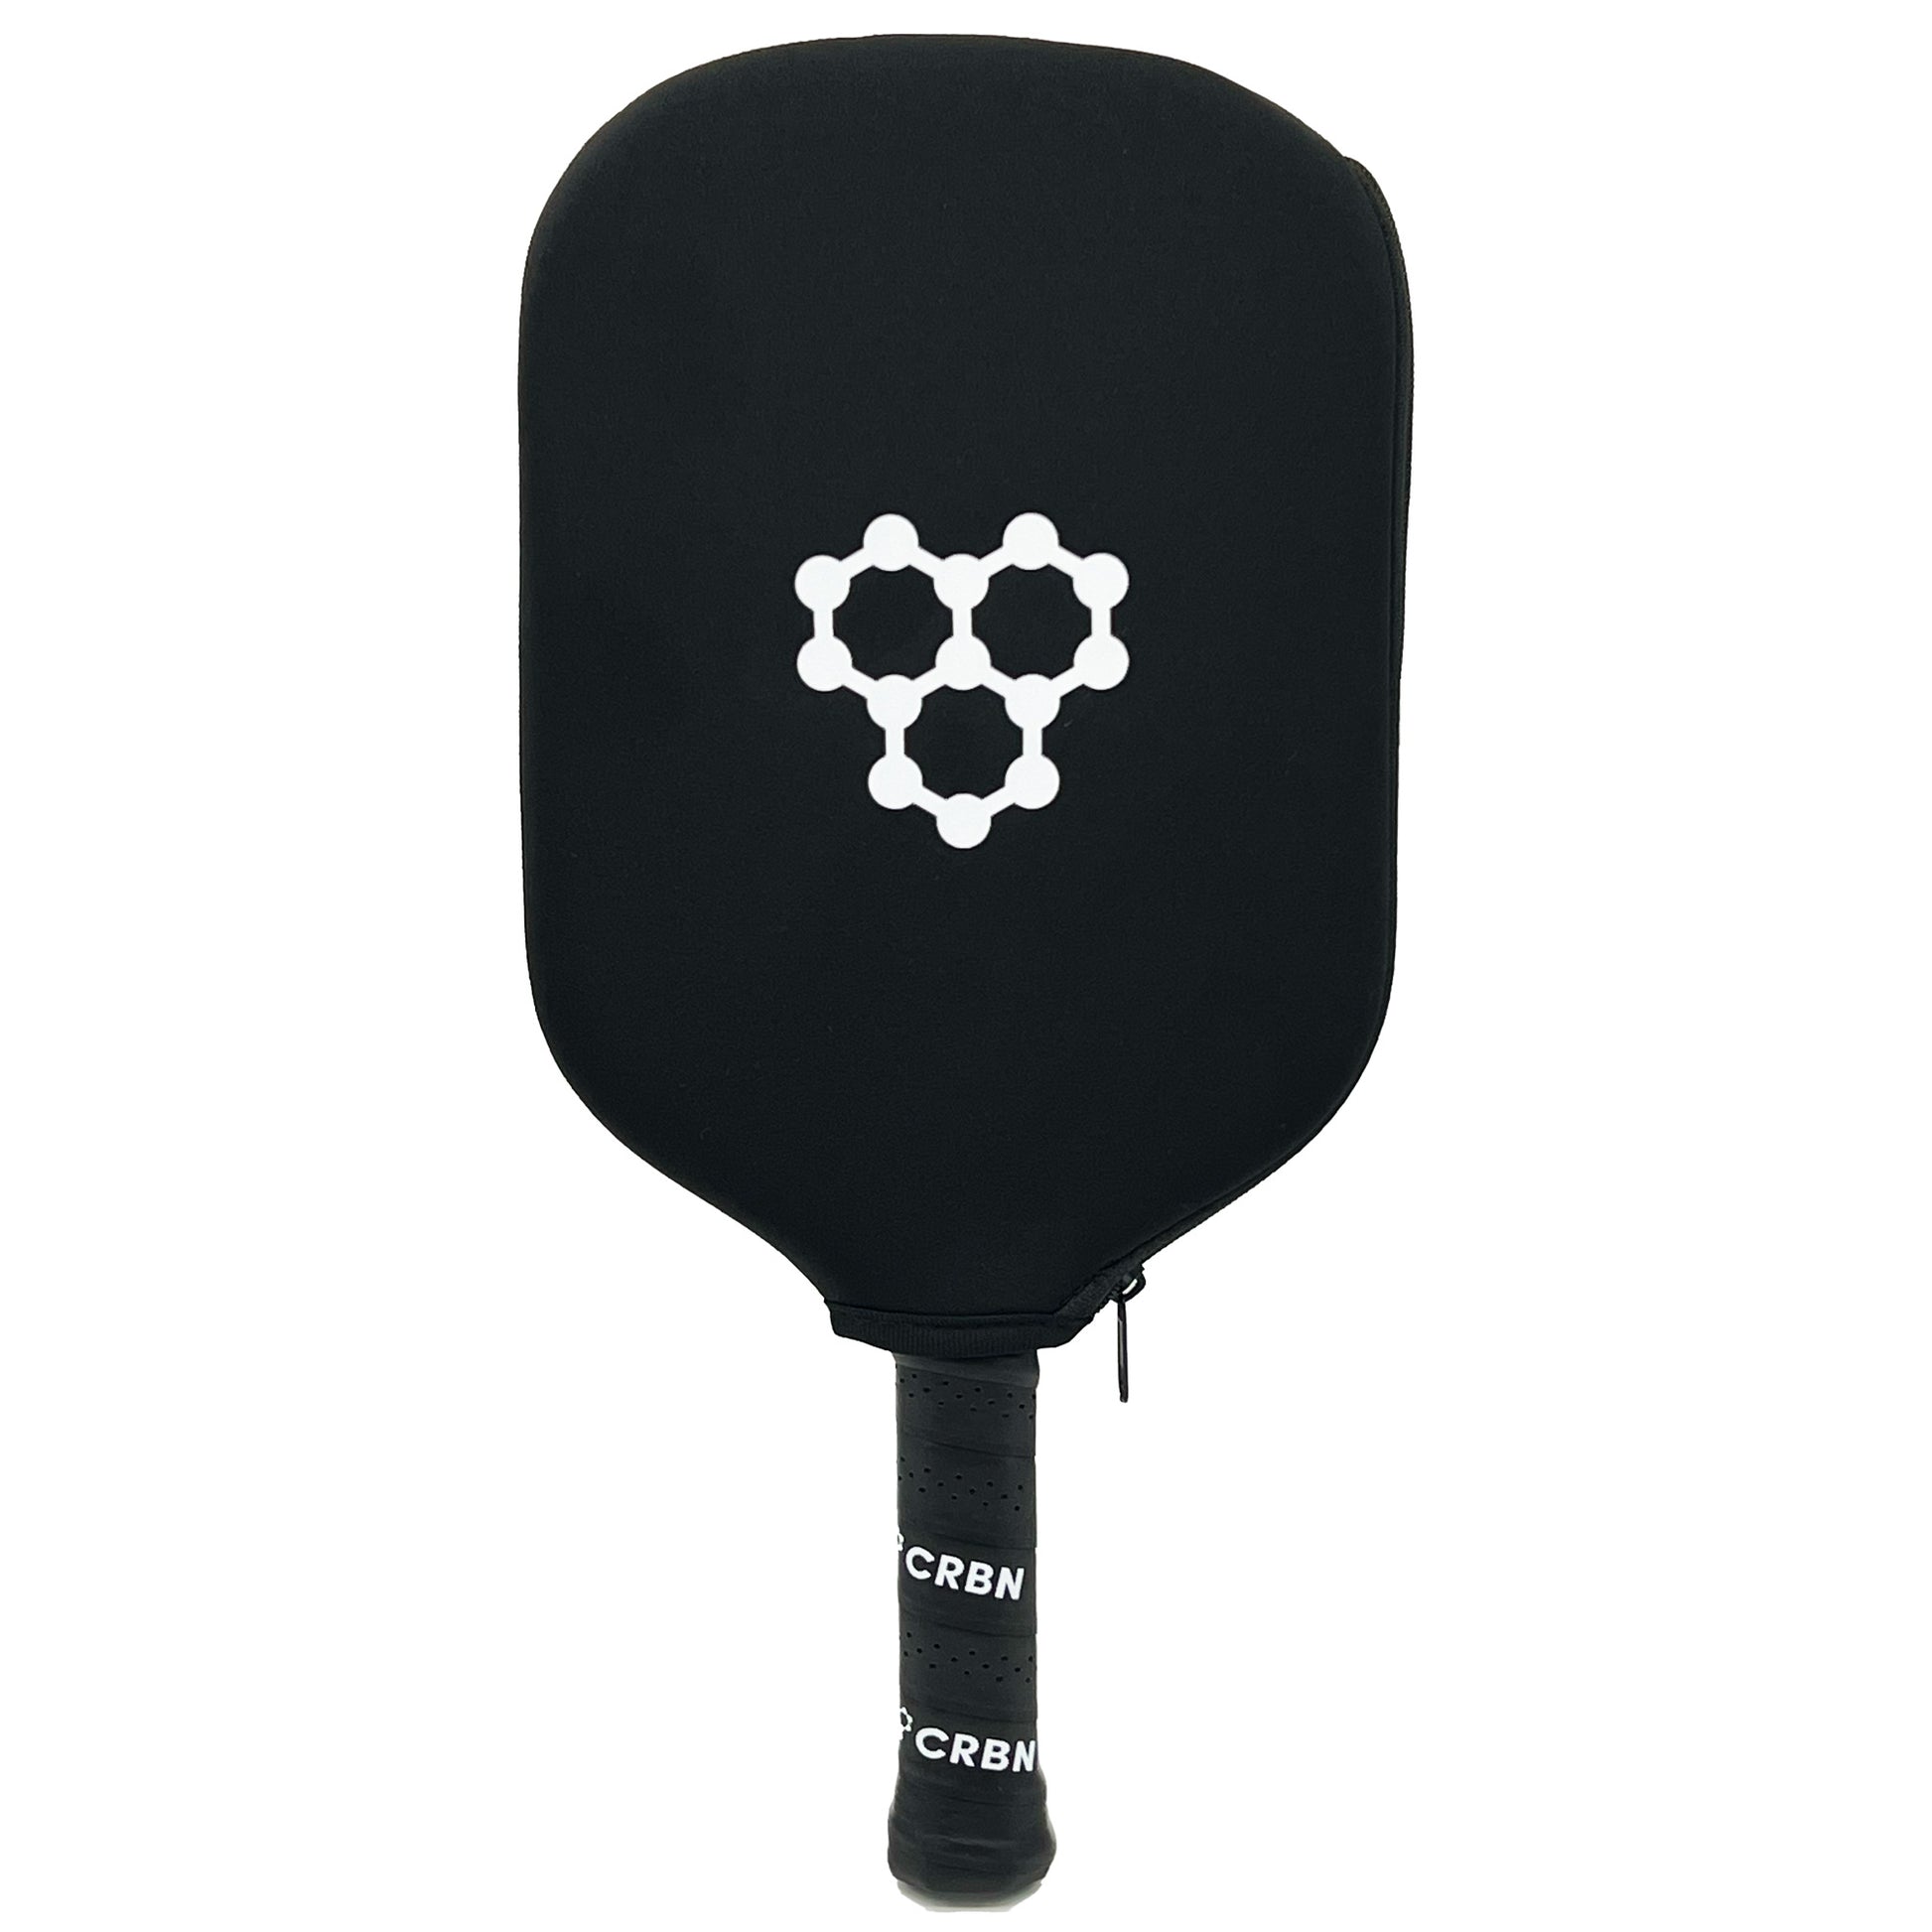 CRBN 3X Power Series Paddle.  One of the best paddles on the market and delivers superior performance for all players.